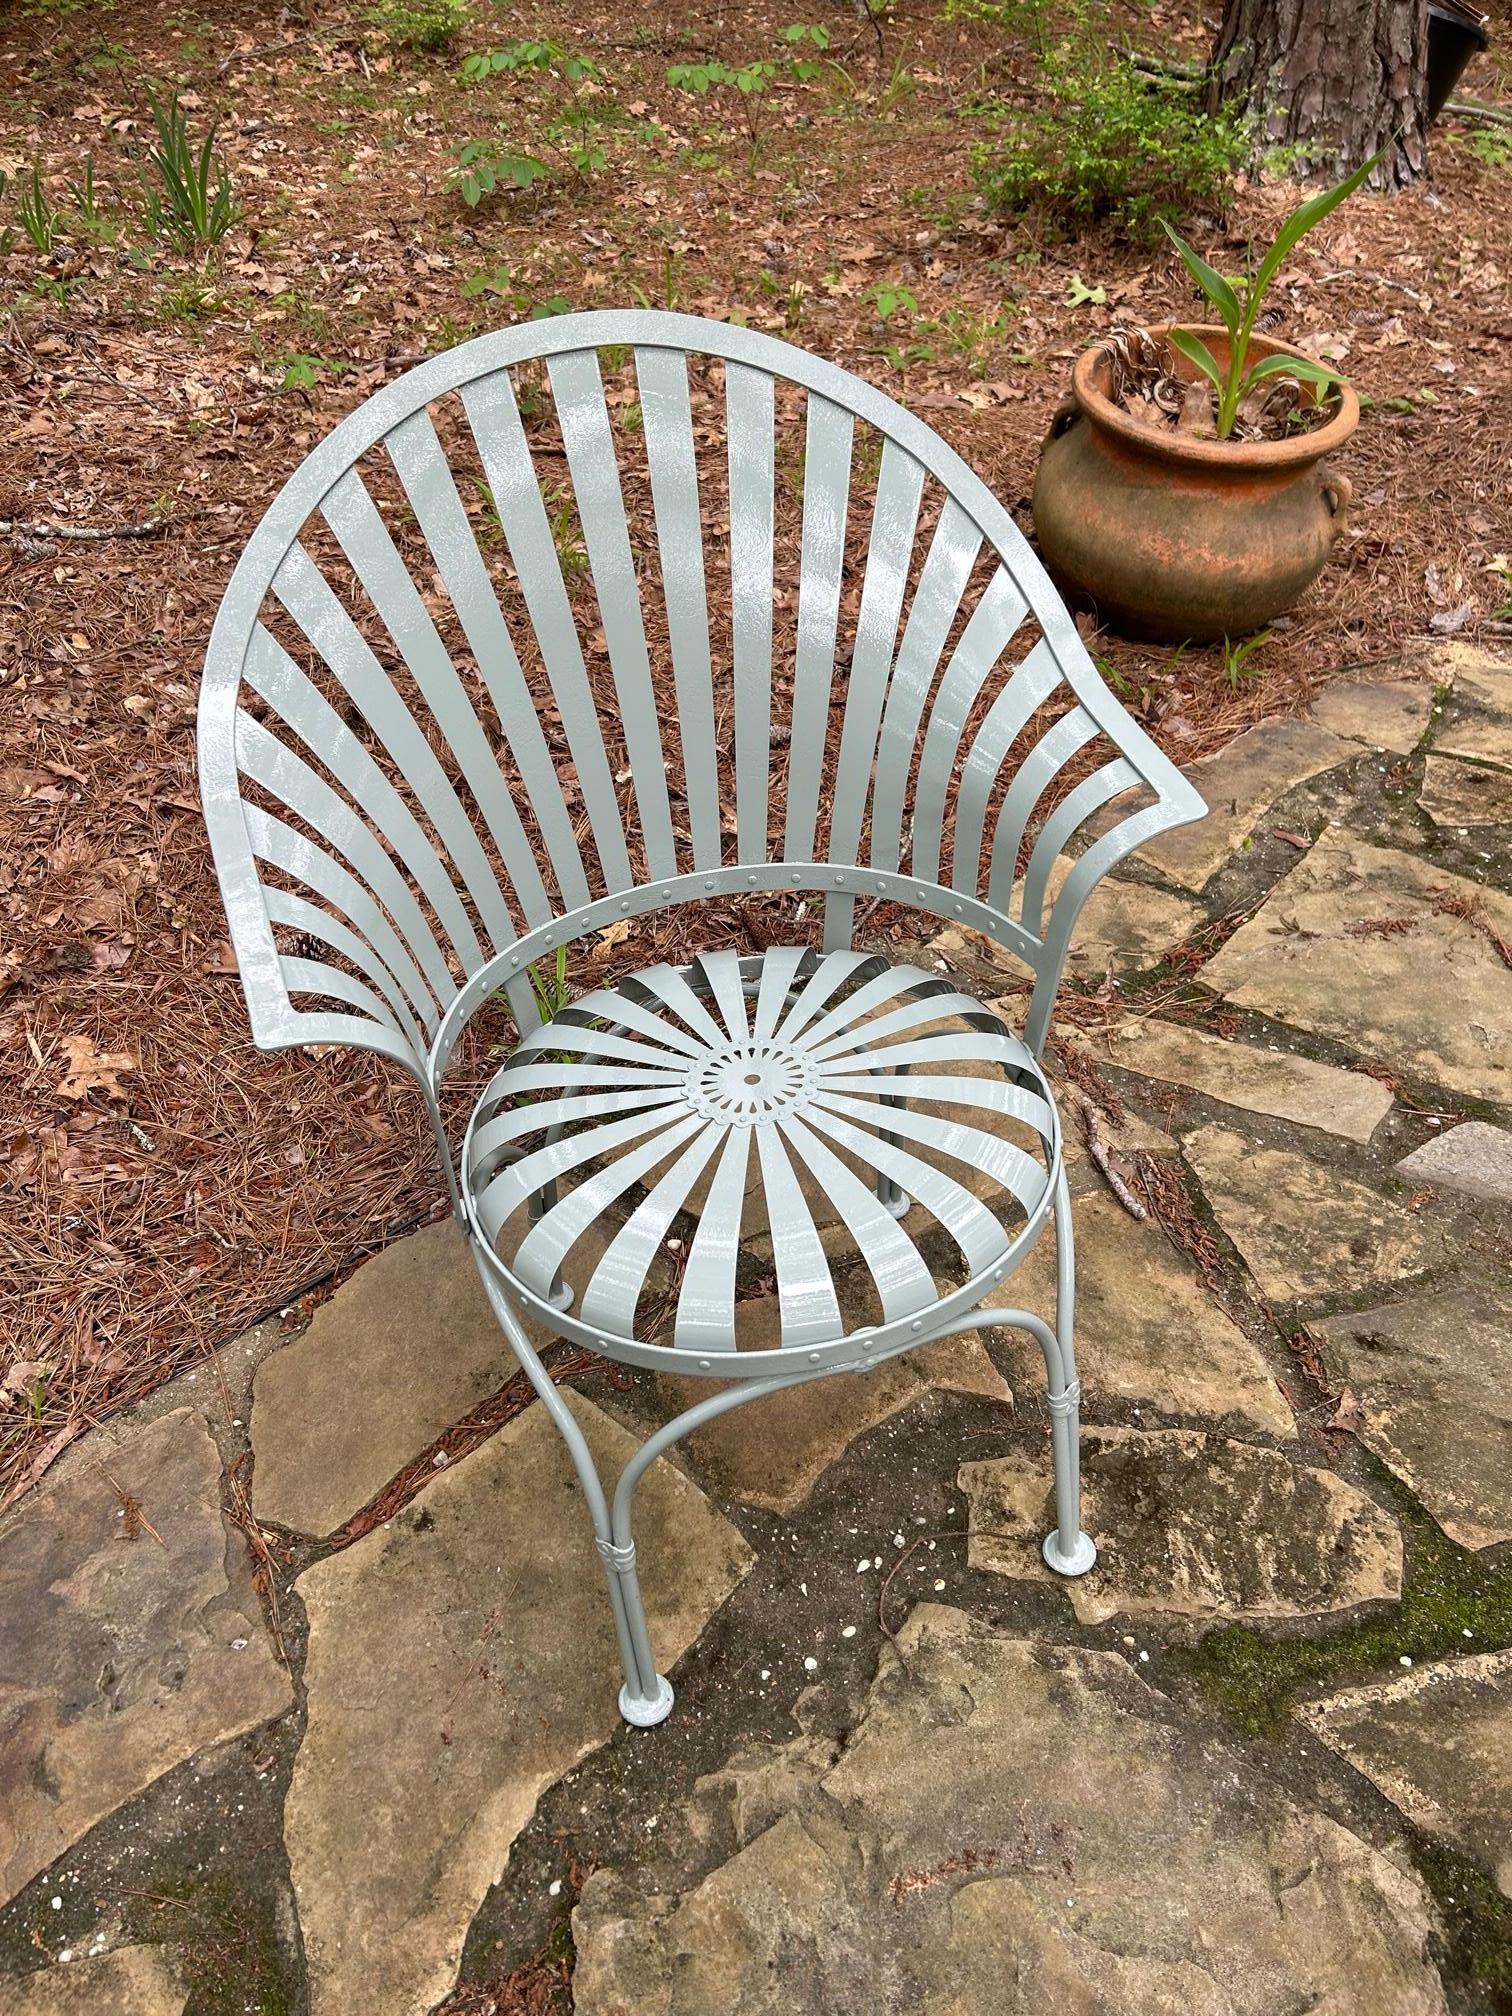 1940s Francois Carre Fanback Garden Chair In Excellent Condition For Sale In Evans, GA